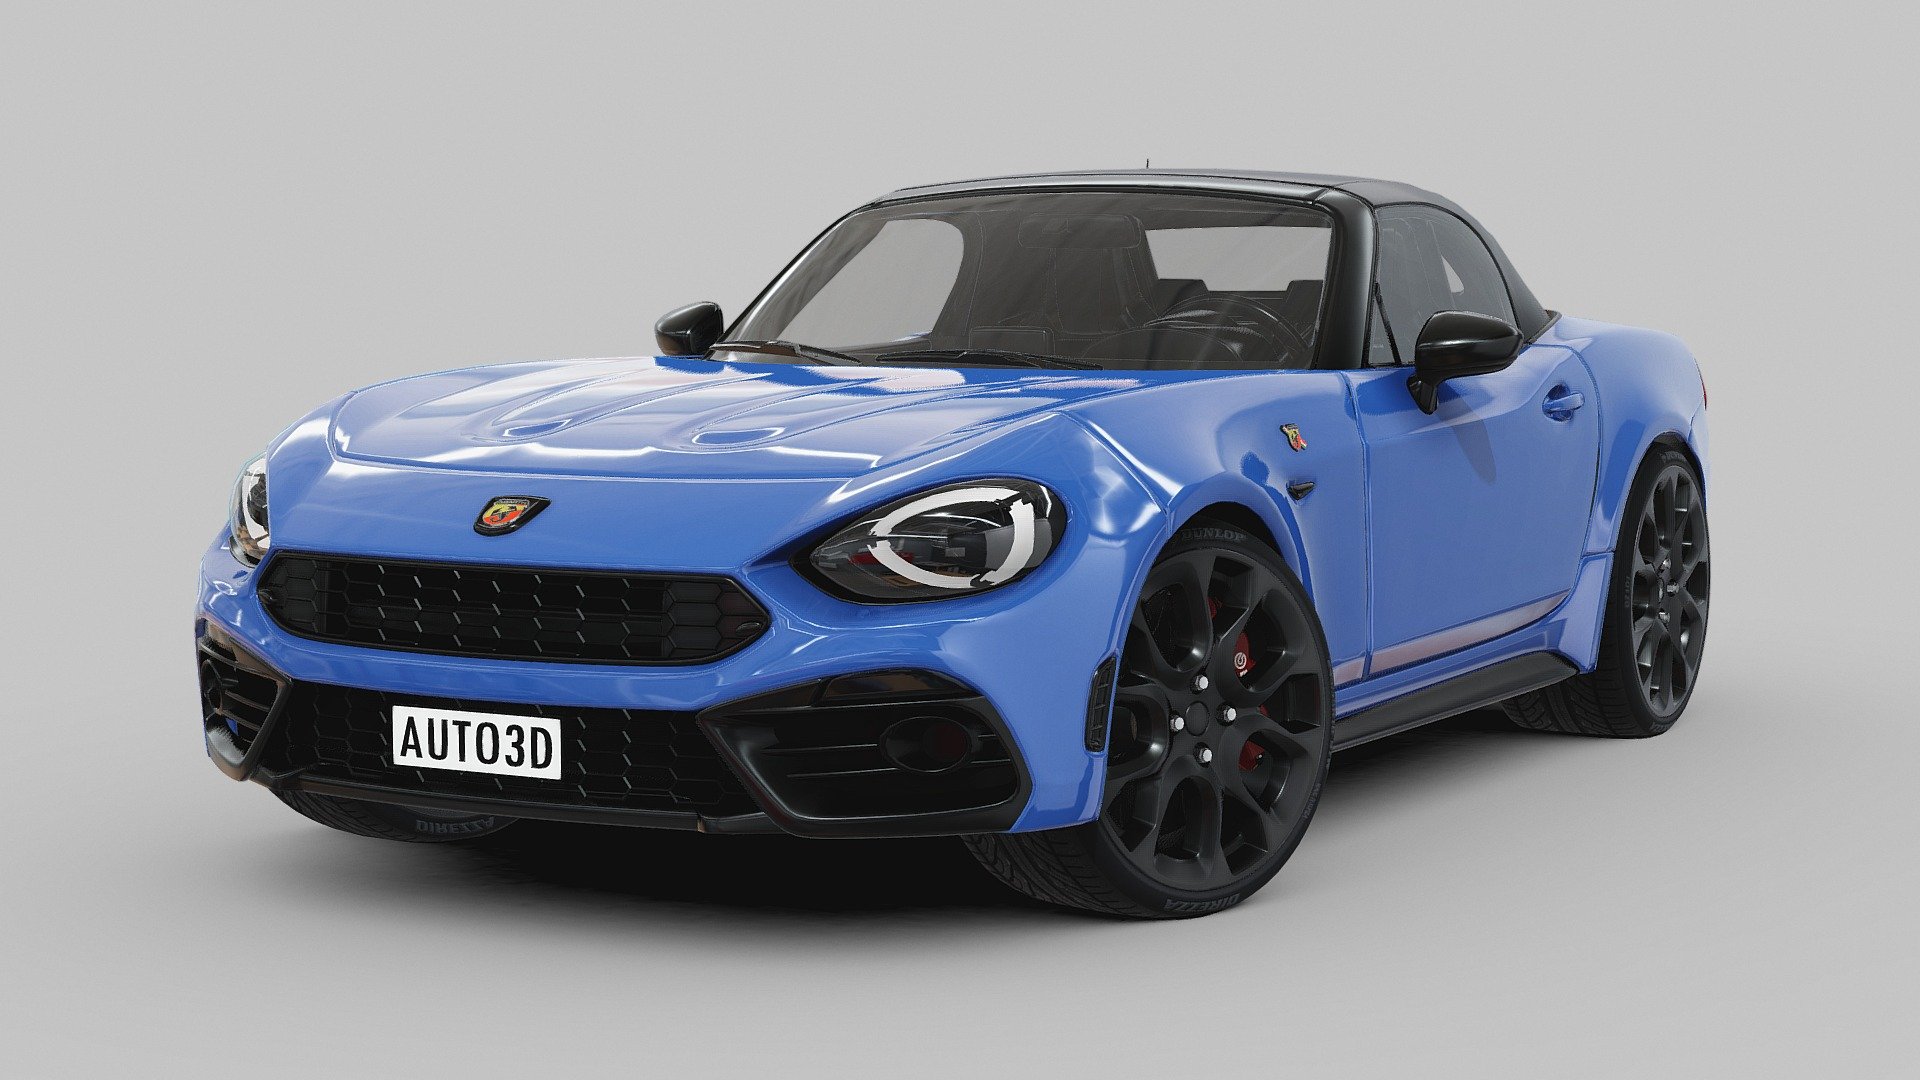 The Abarth 124 Spider is a thrilling and sporty convertible that combines Italian design with exhilarating performance. Derived from the Fiat 124 Spider, the Abarth version takes the driving experience to a new level. With its aggressive styling, distinctive scorpion logo, and performance-oriented enhancements, the Abarth 124 Spider exudes an aura of excitement. Under the hood lies a potent 1.4-liter turbocharged engine, delivering impressive horsepower and torque, making it a responsive and agile roadster. The convertible top allows for open-air driving, adding an extra layer of enjoyment to the driving experience. The Abarth 124 Spider represents the spirit of Italian performance and passion, providing an exhilarating and enjoyable journey on winding roads and beyond. It stands as a tribute to Abarth's racing heritage and dedication to creating spirited and distinctive sports cars 3d model